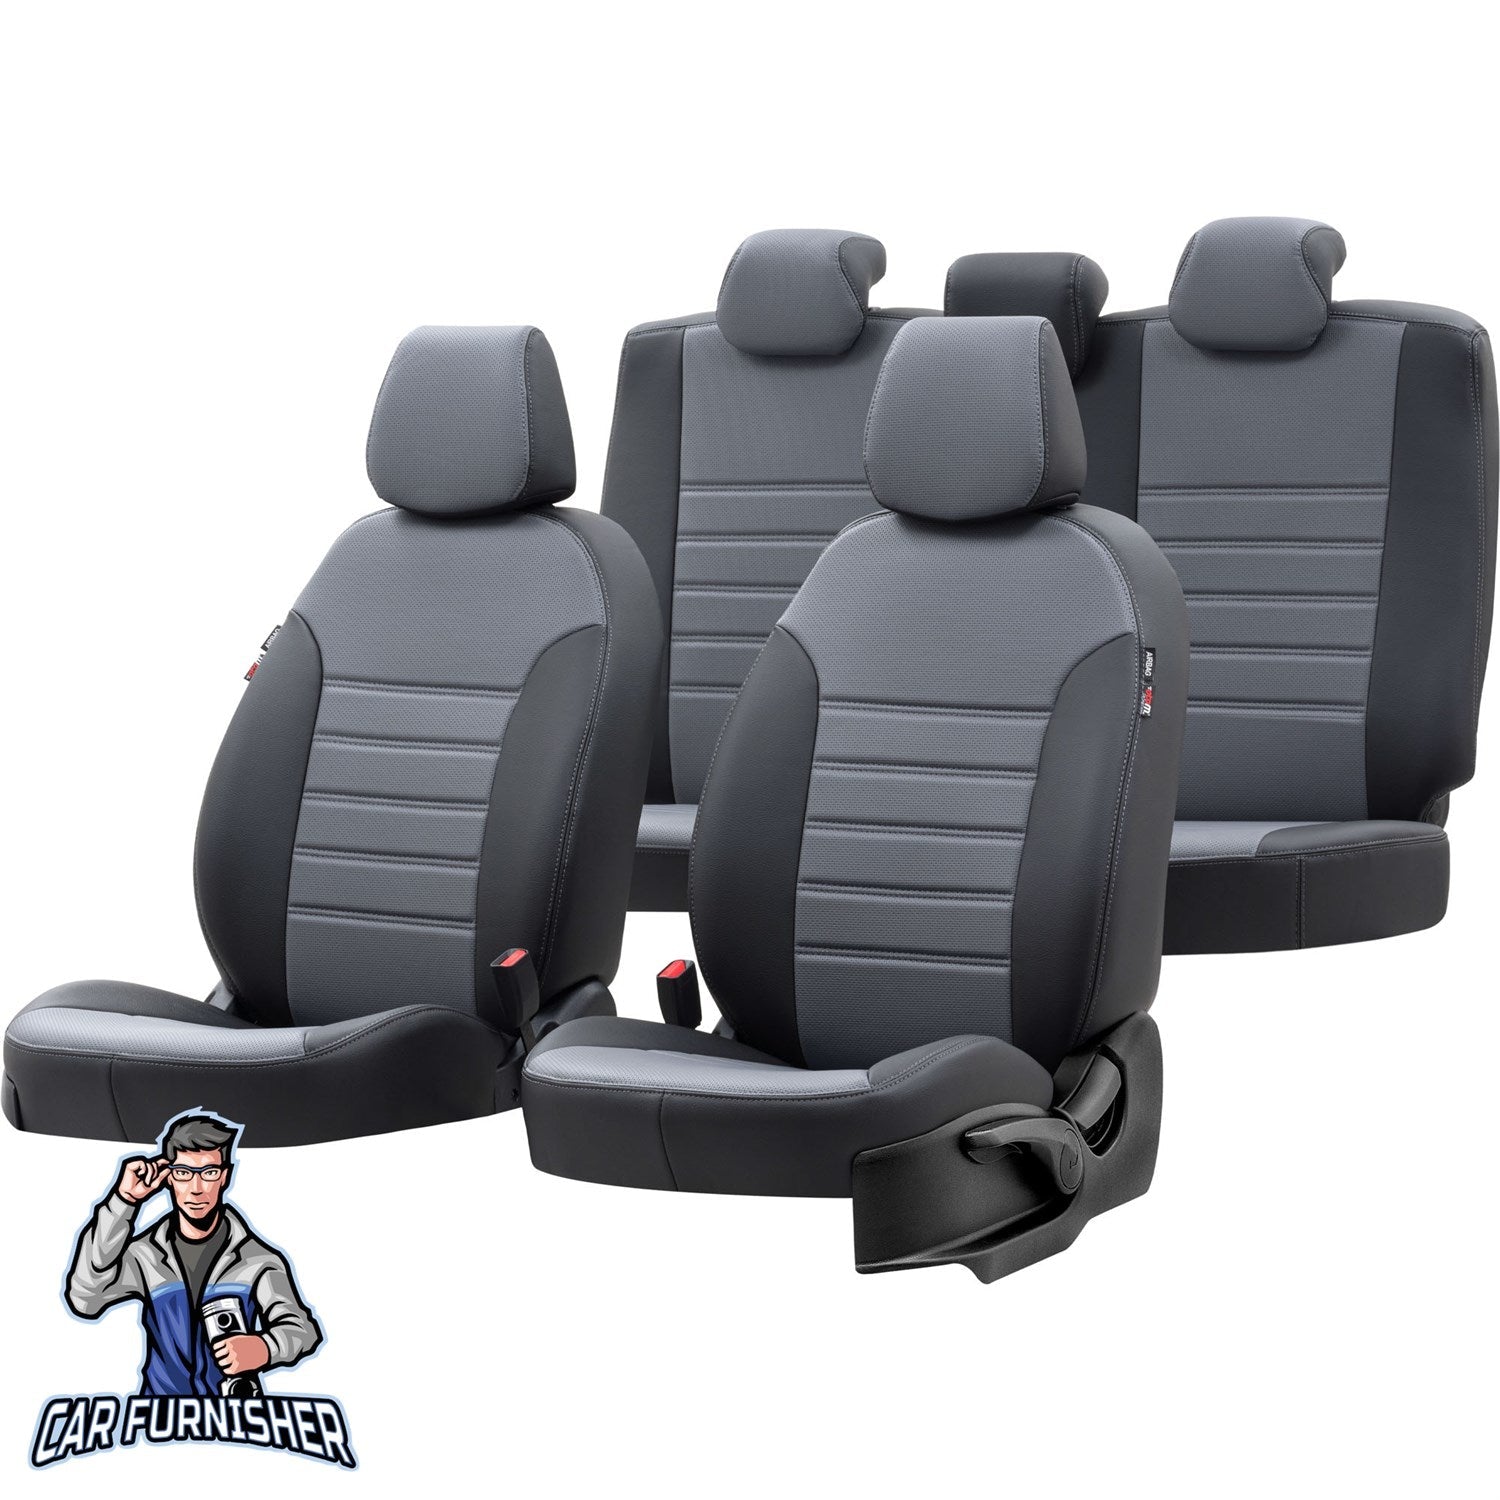 Renault Twingo Seat Cover New York Leather Design Smoked Black Leather